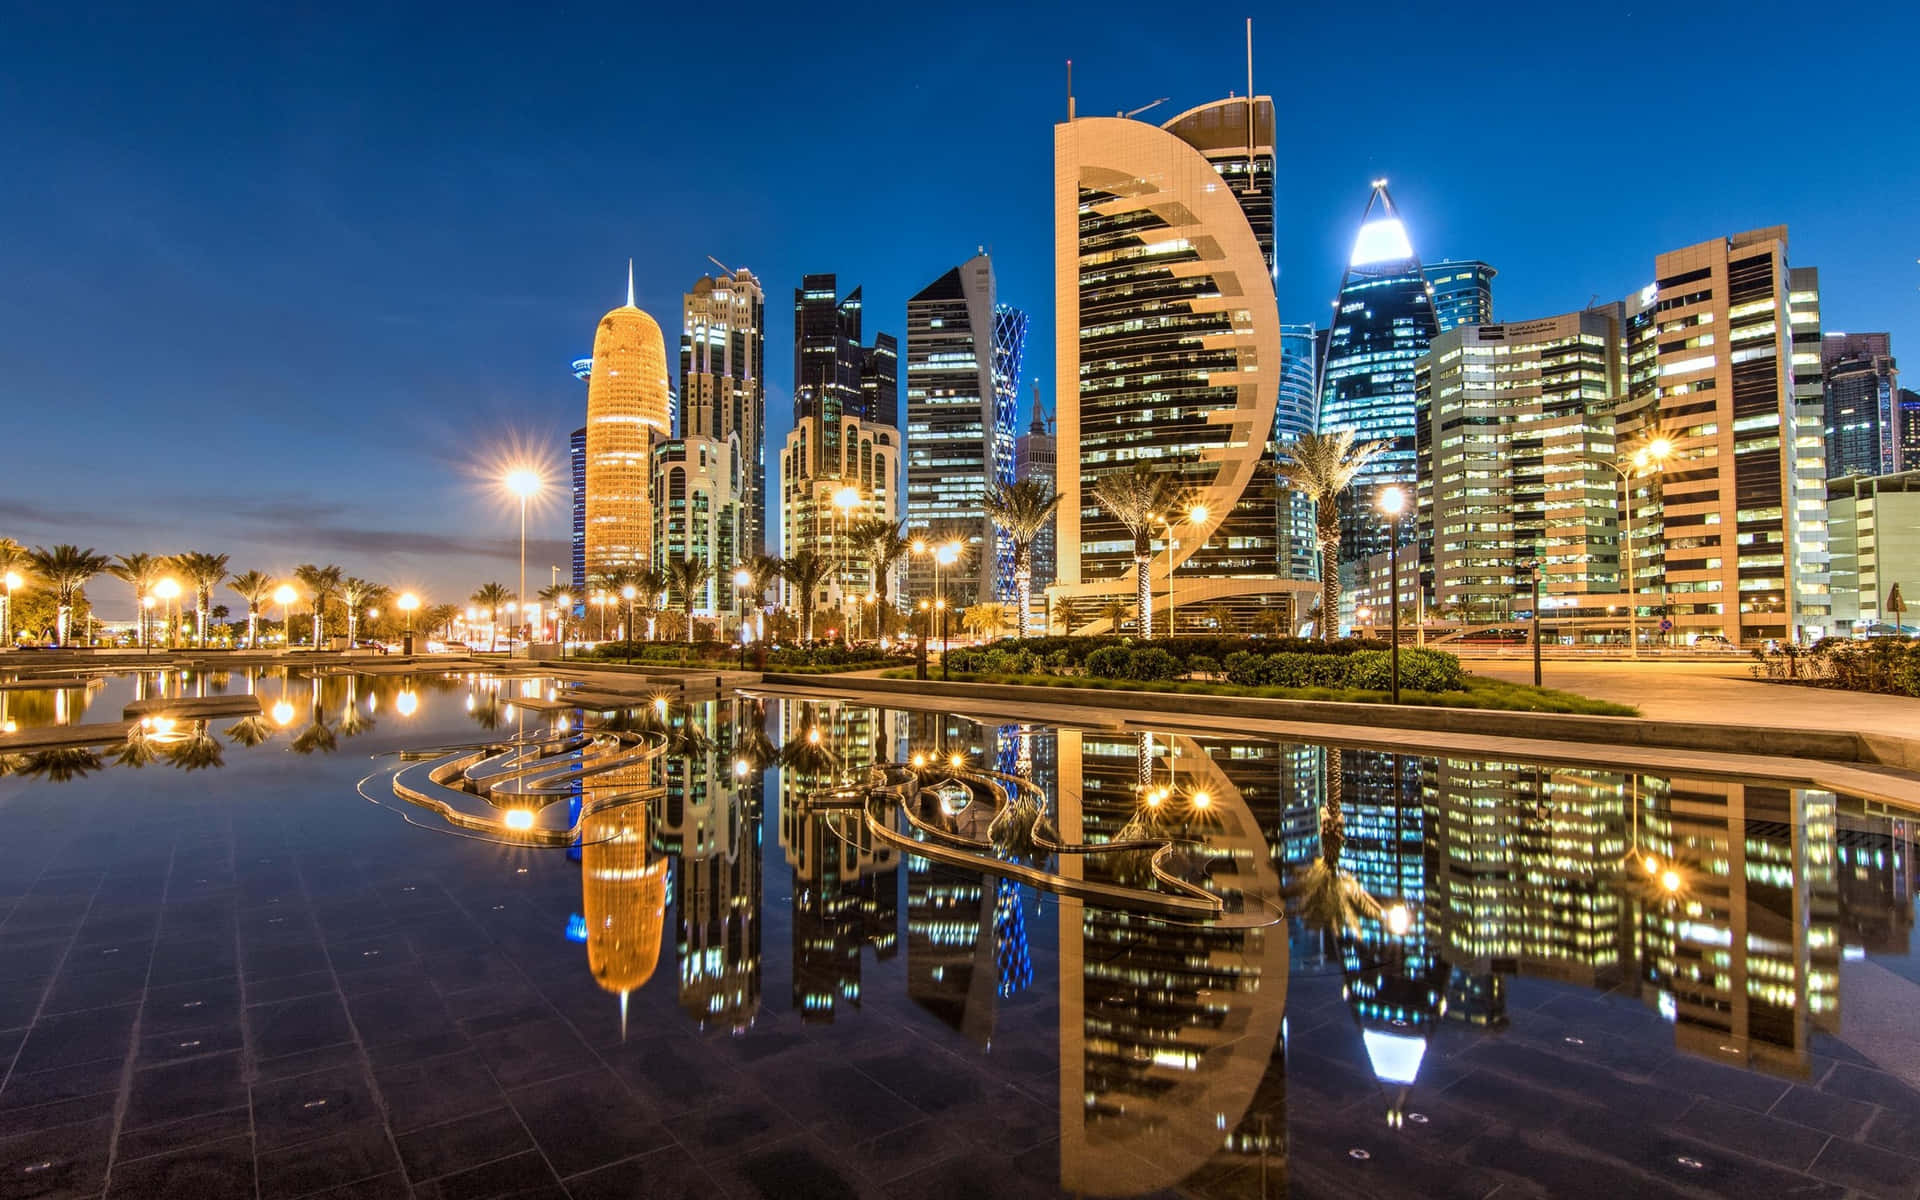 Welcome to The Dazzling City of Doha, Qatar